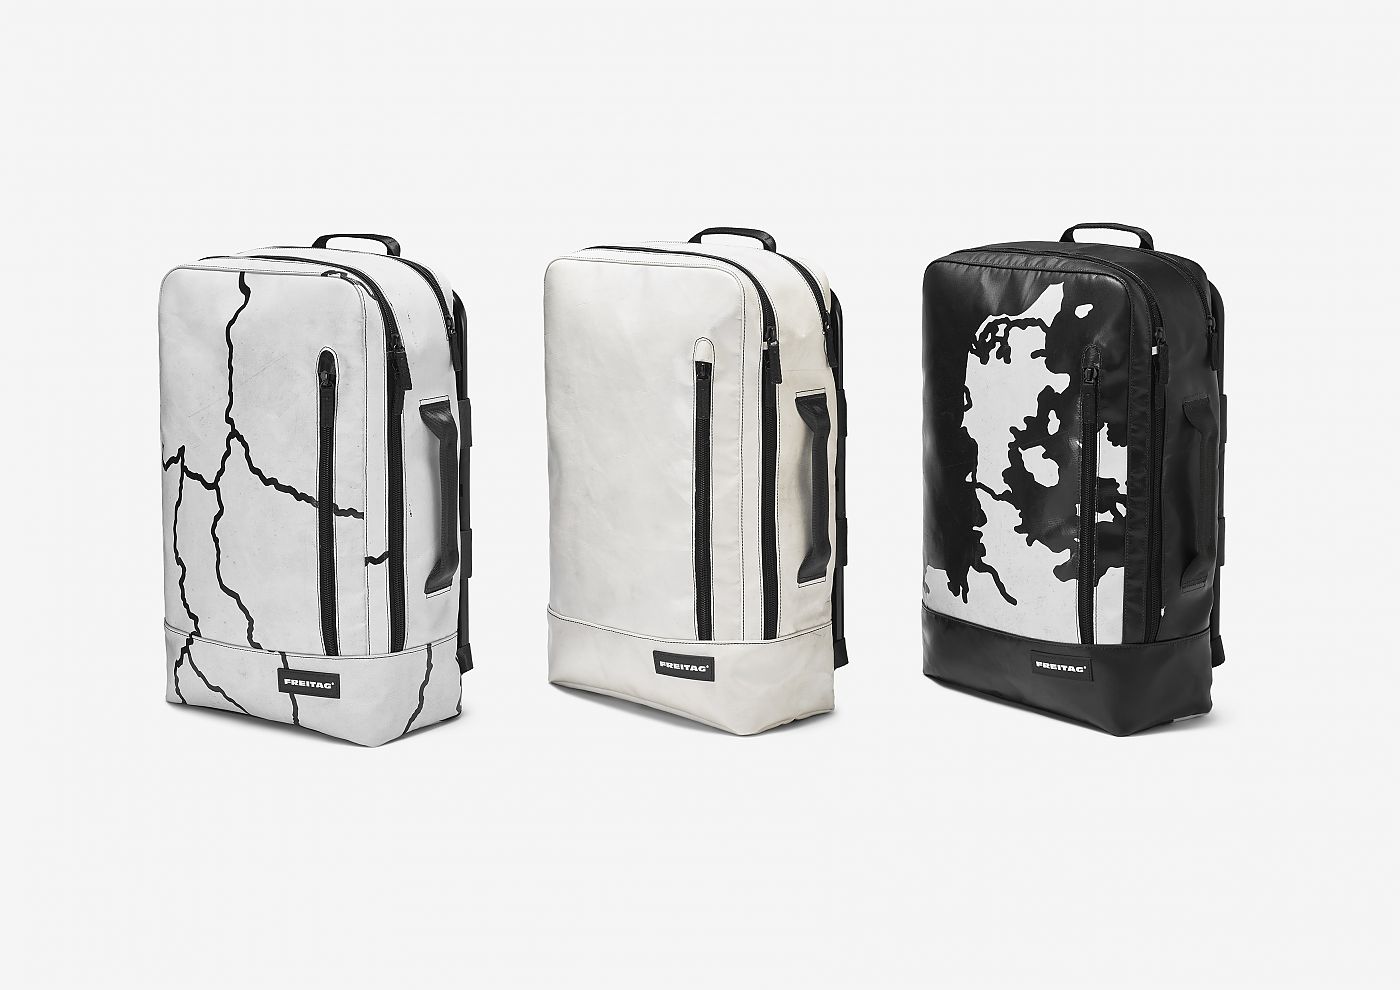 Brompton and Freitag Partner to Put Stylish, Sustainable New Spin